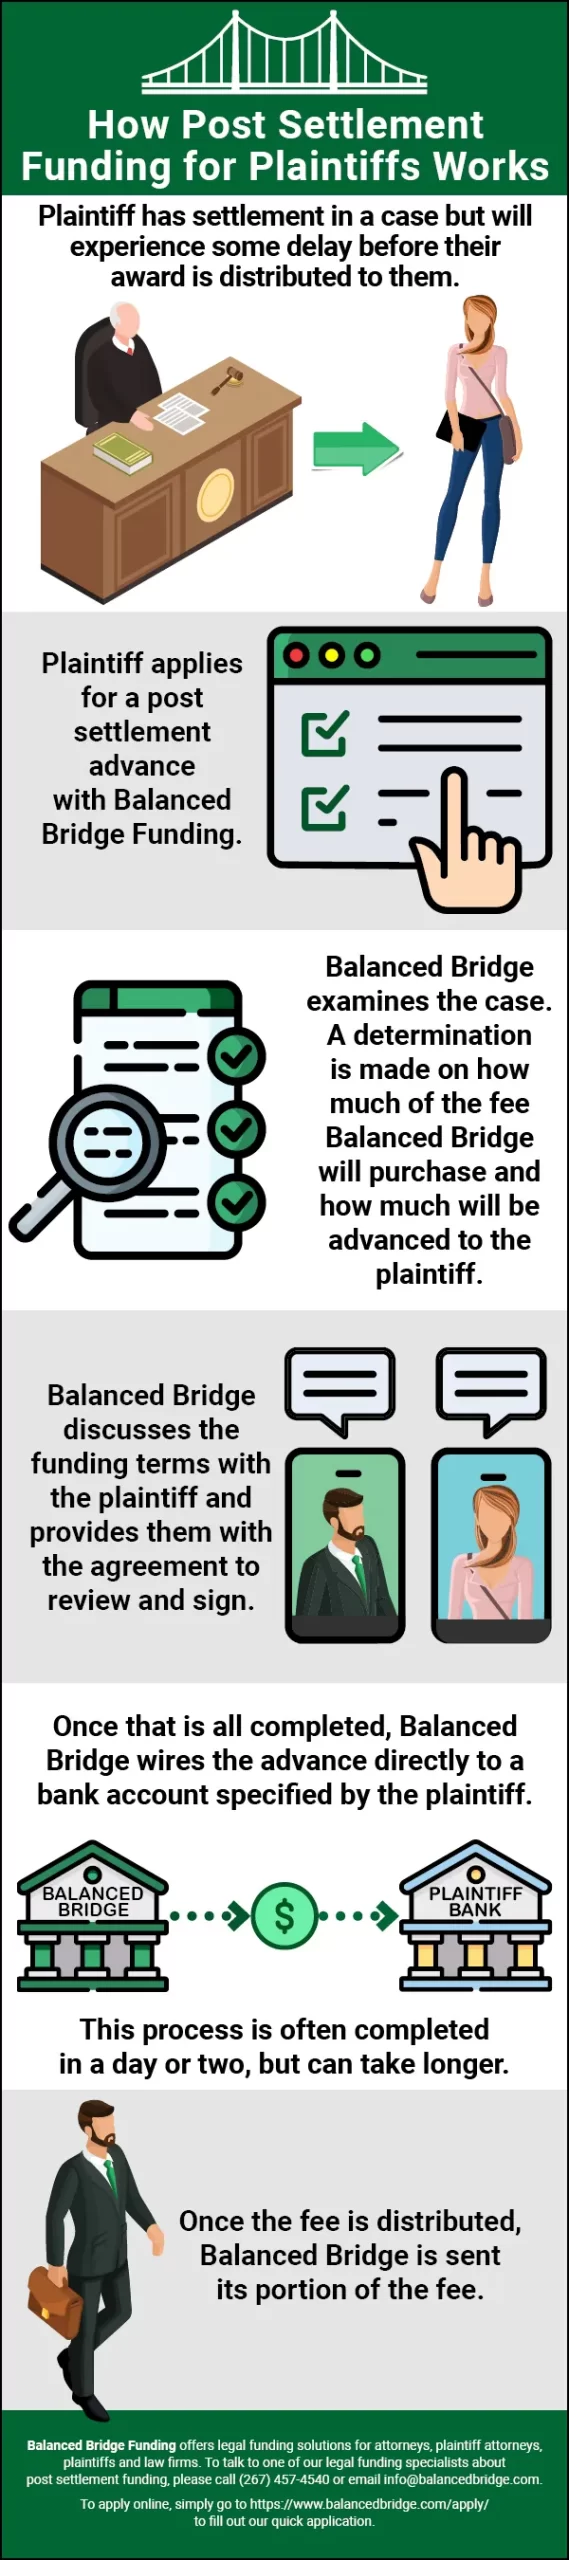 When Will The Bard Hernia Mesh Lawsuit Settle Infographic